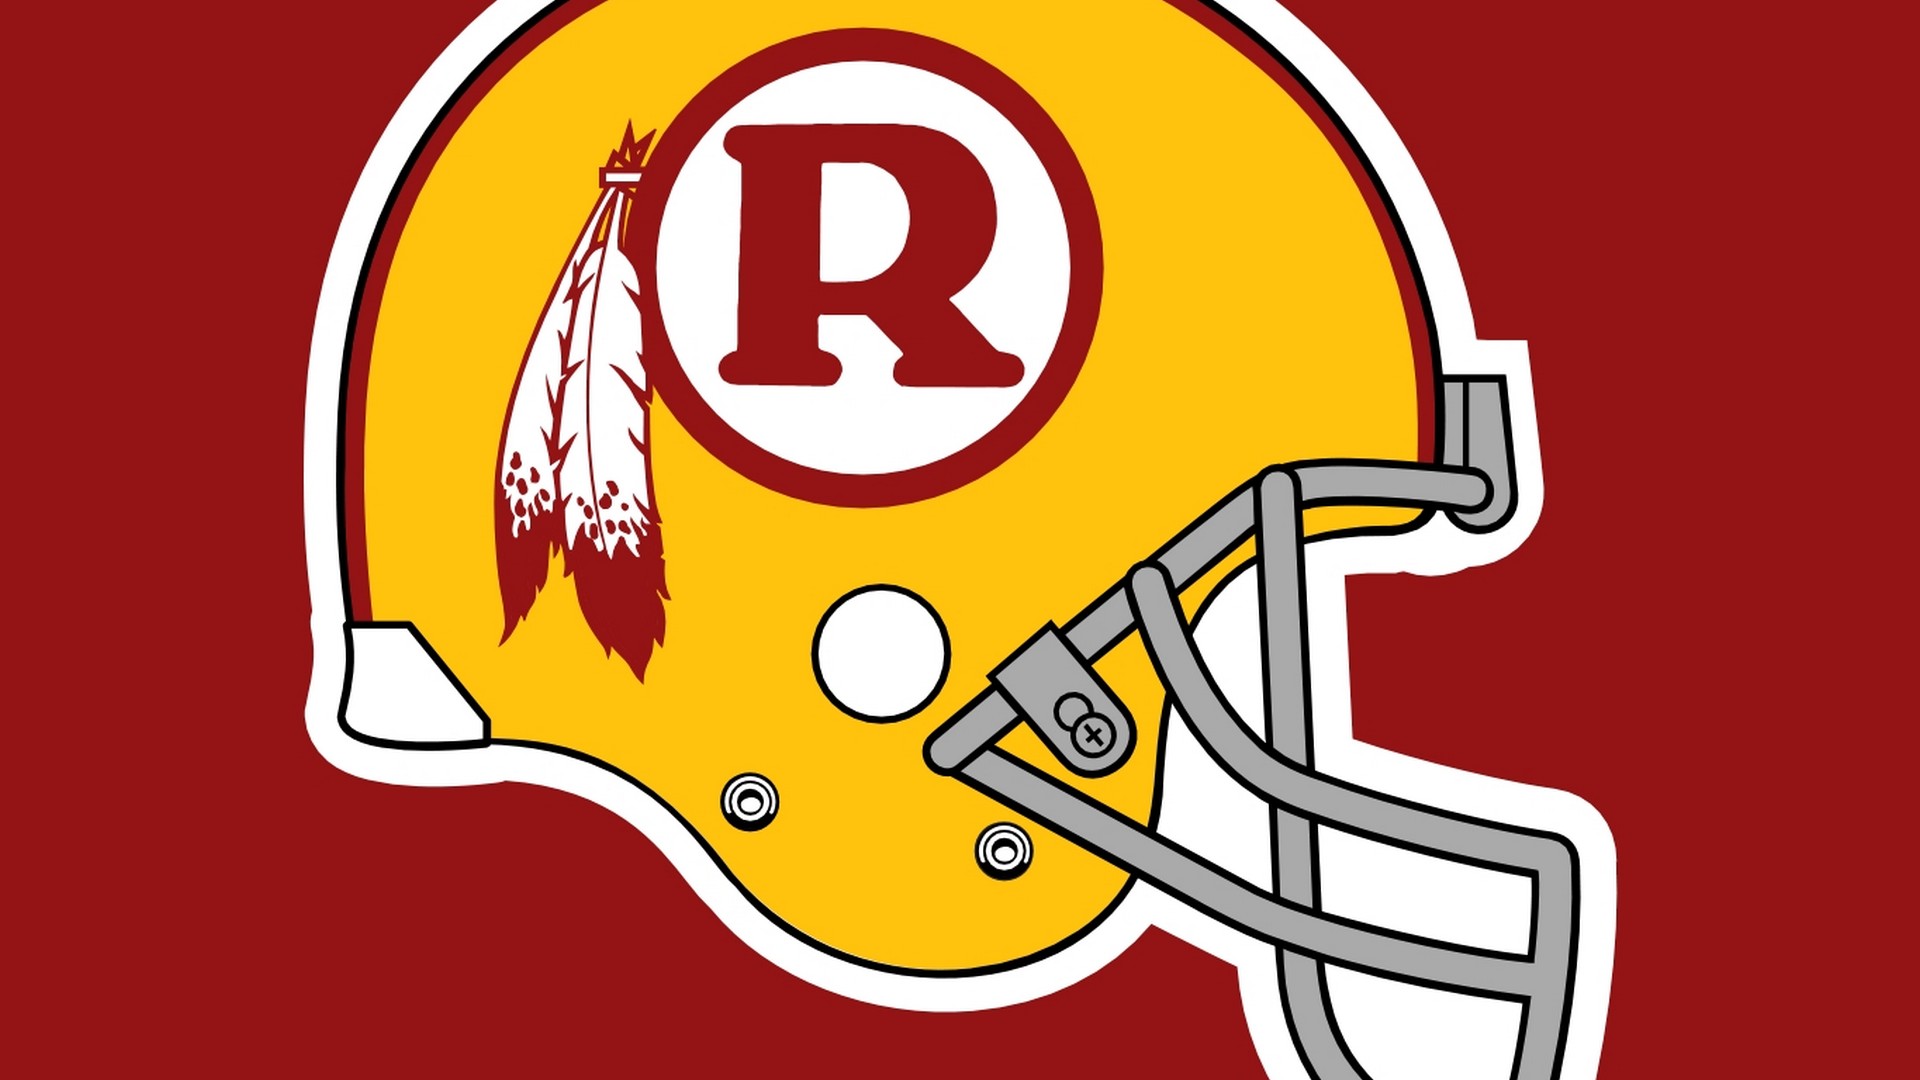 Washington Redskins NFL HD Wallpapers With high-resolution 1920X1080 pixel. You can use this wallpaper for your Mac or Windows Desktop Background, iPhone, Android or Tablet and another Smartphone device